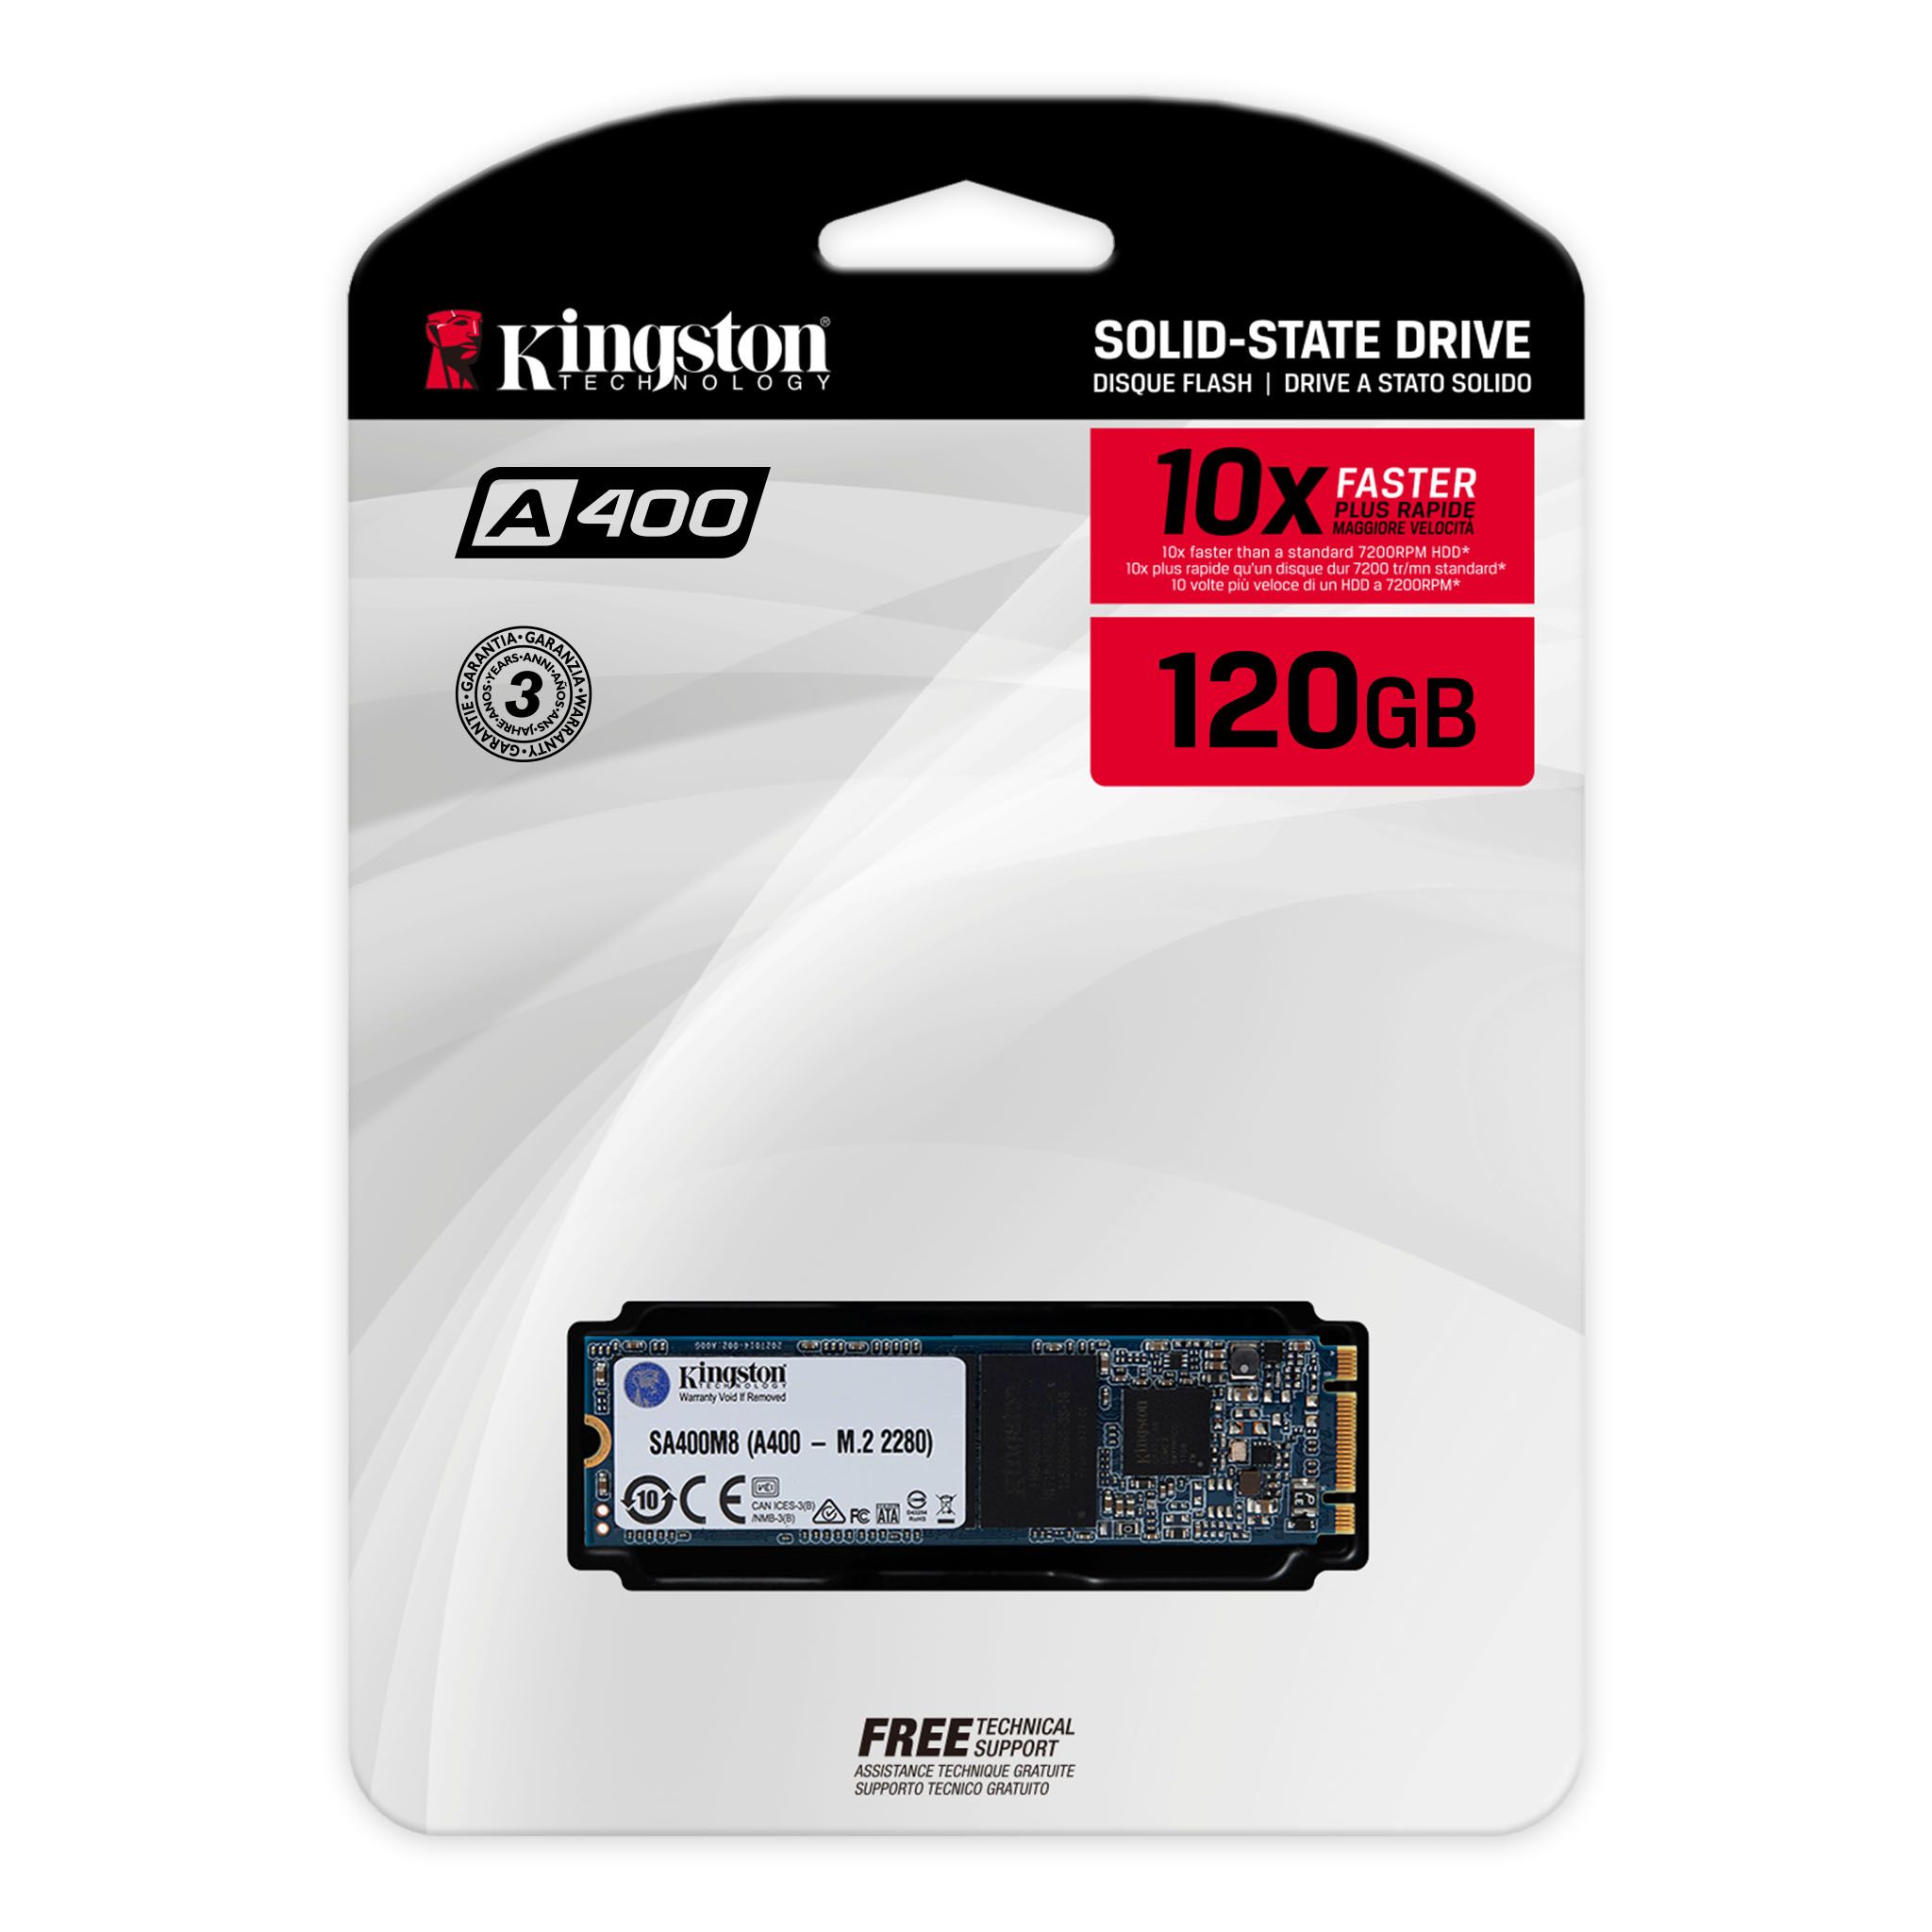 A400 Solid State Drive – 120GB～1.92TB - Kingston Technology